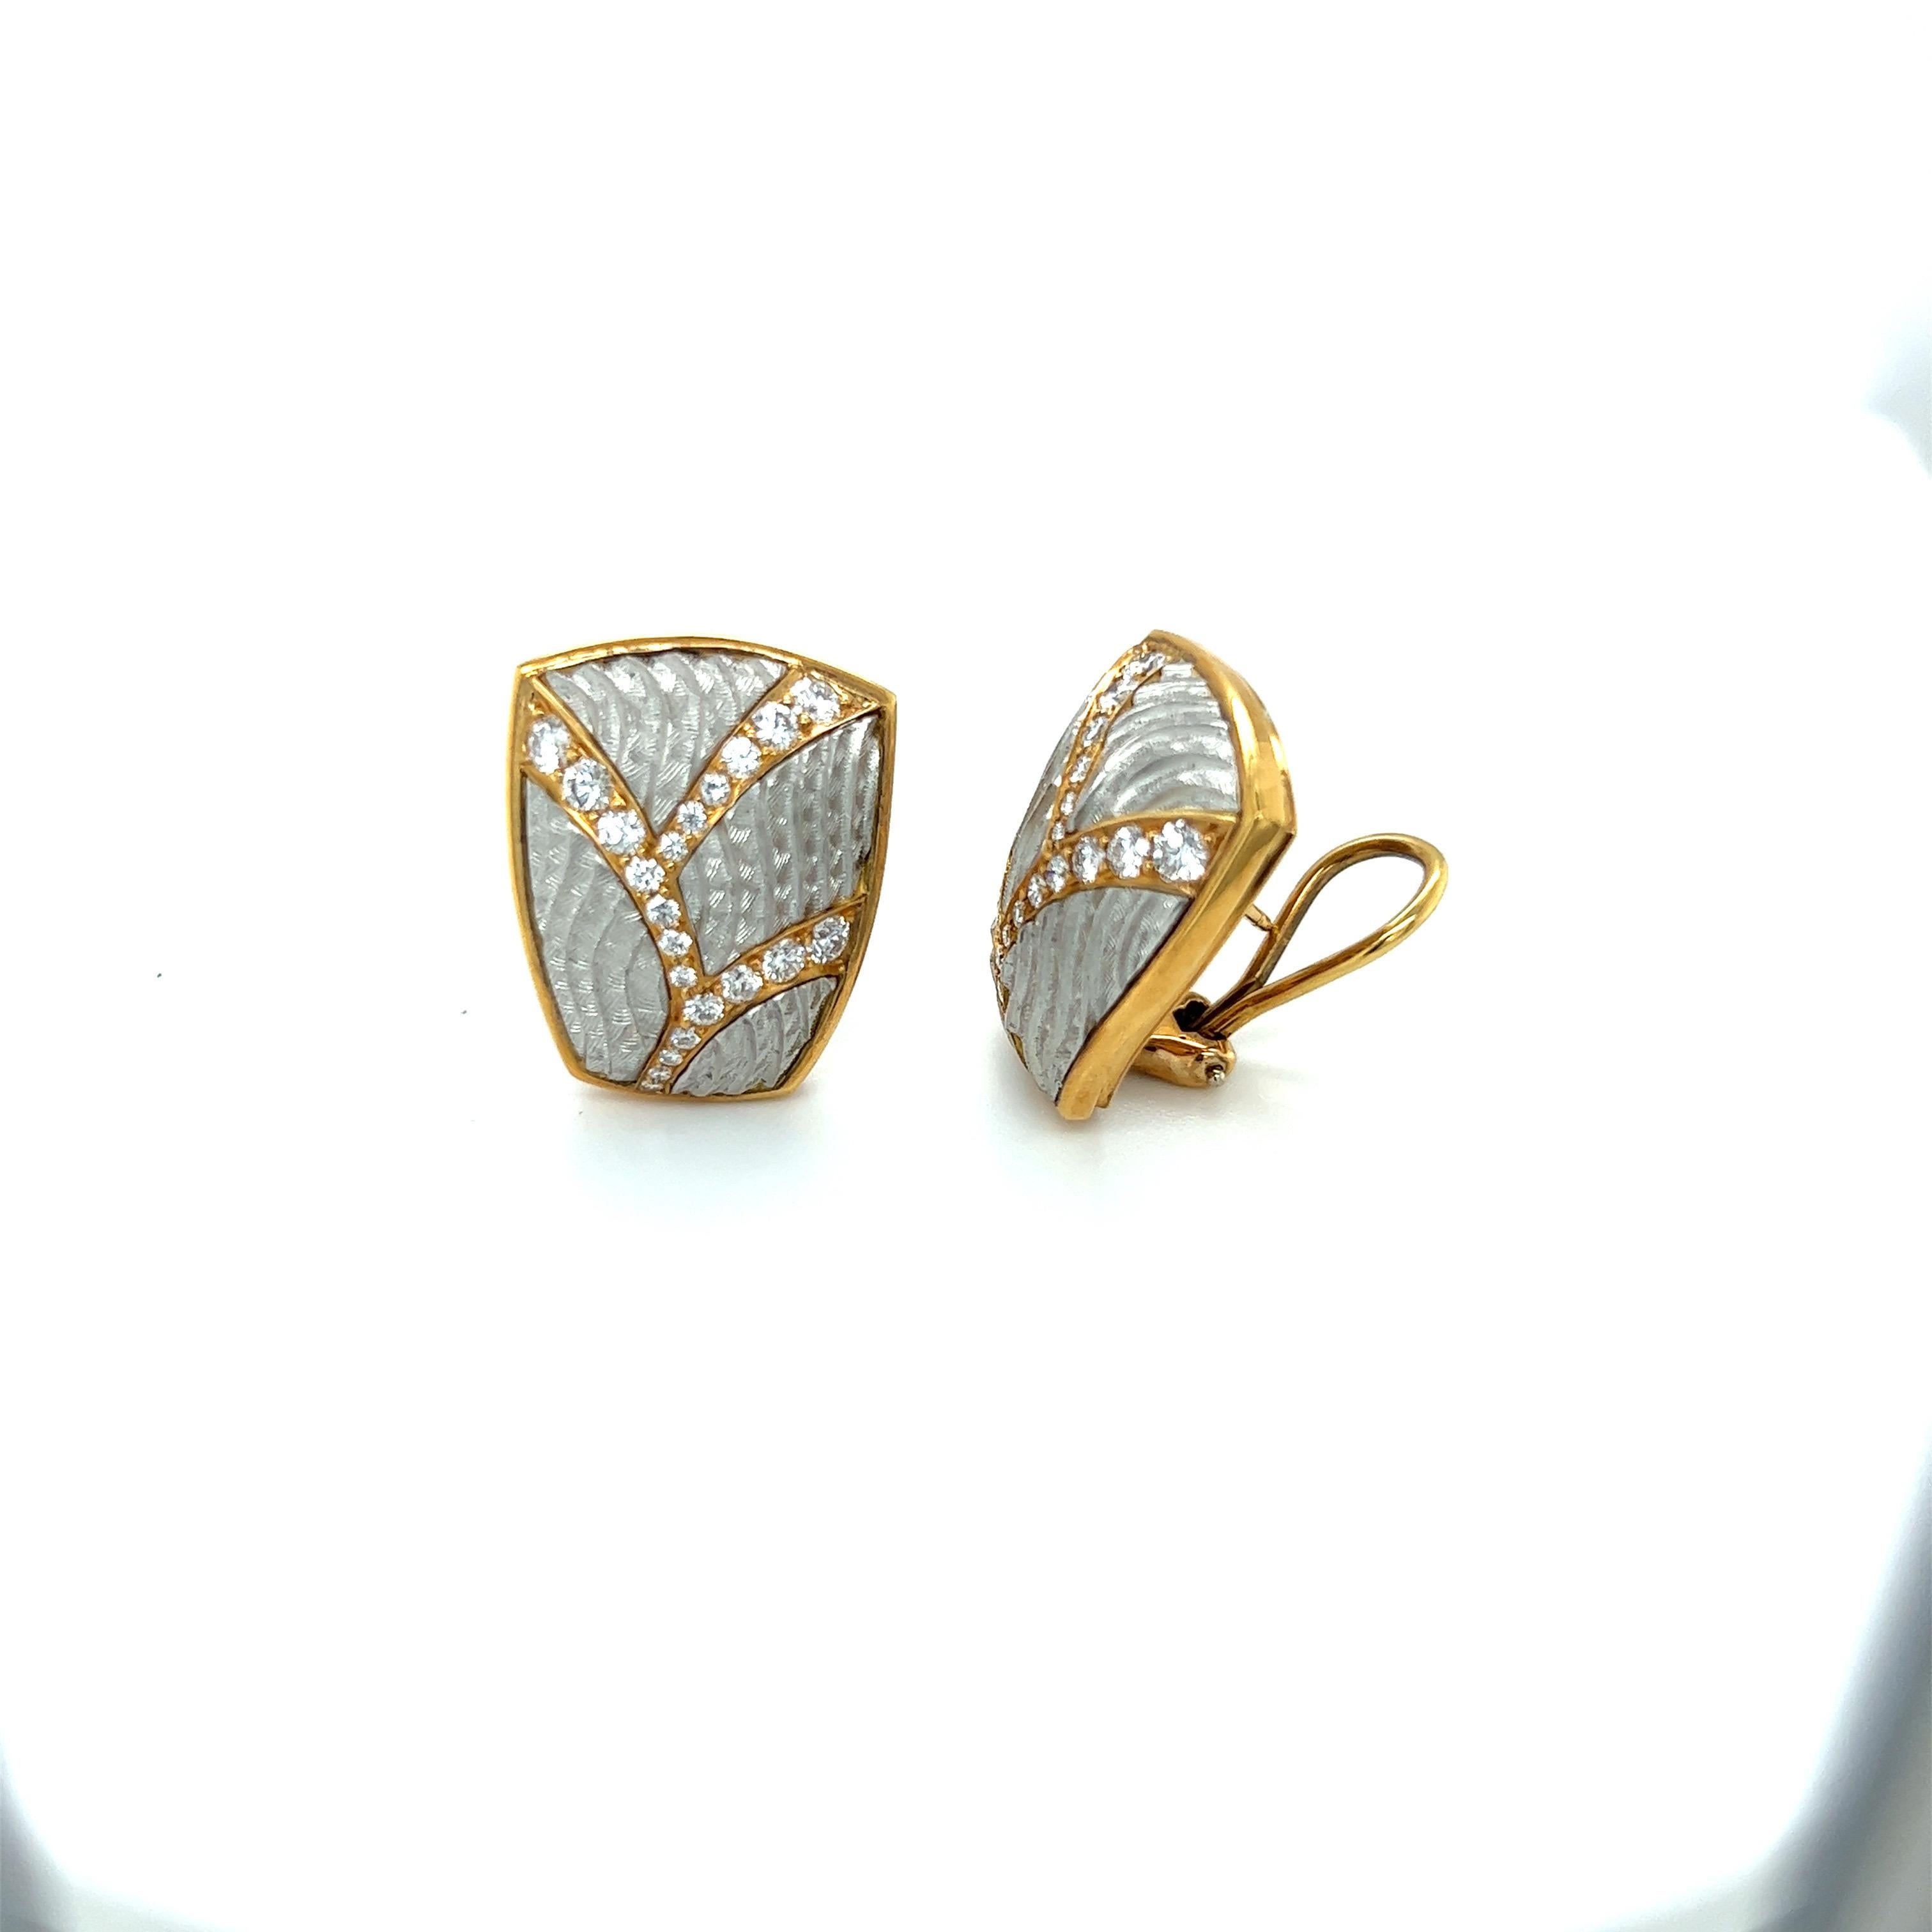 These 18kt and Platinum earrings are an iconic representation of the artist, Michael Bondanza, world renowned  for his work in precious metals. Each Michael Bondanza piece is expertly hand crafted in the heart of New York City. 
These magnificent